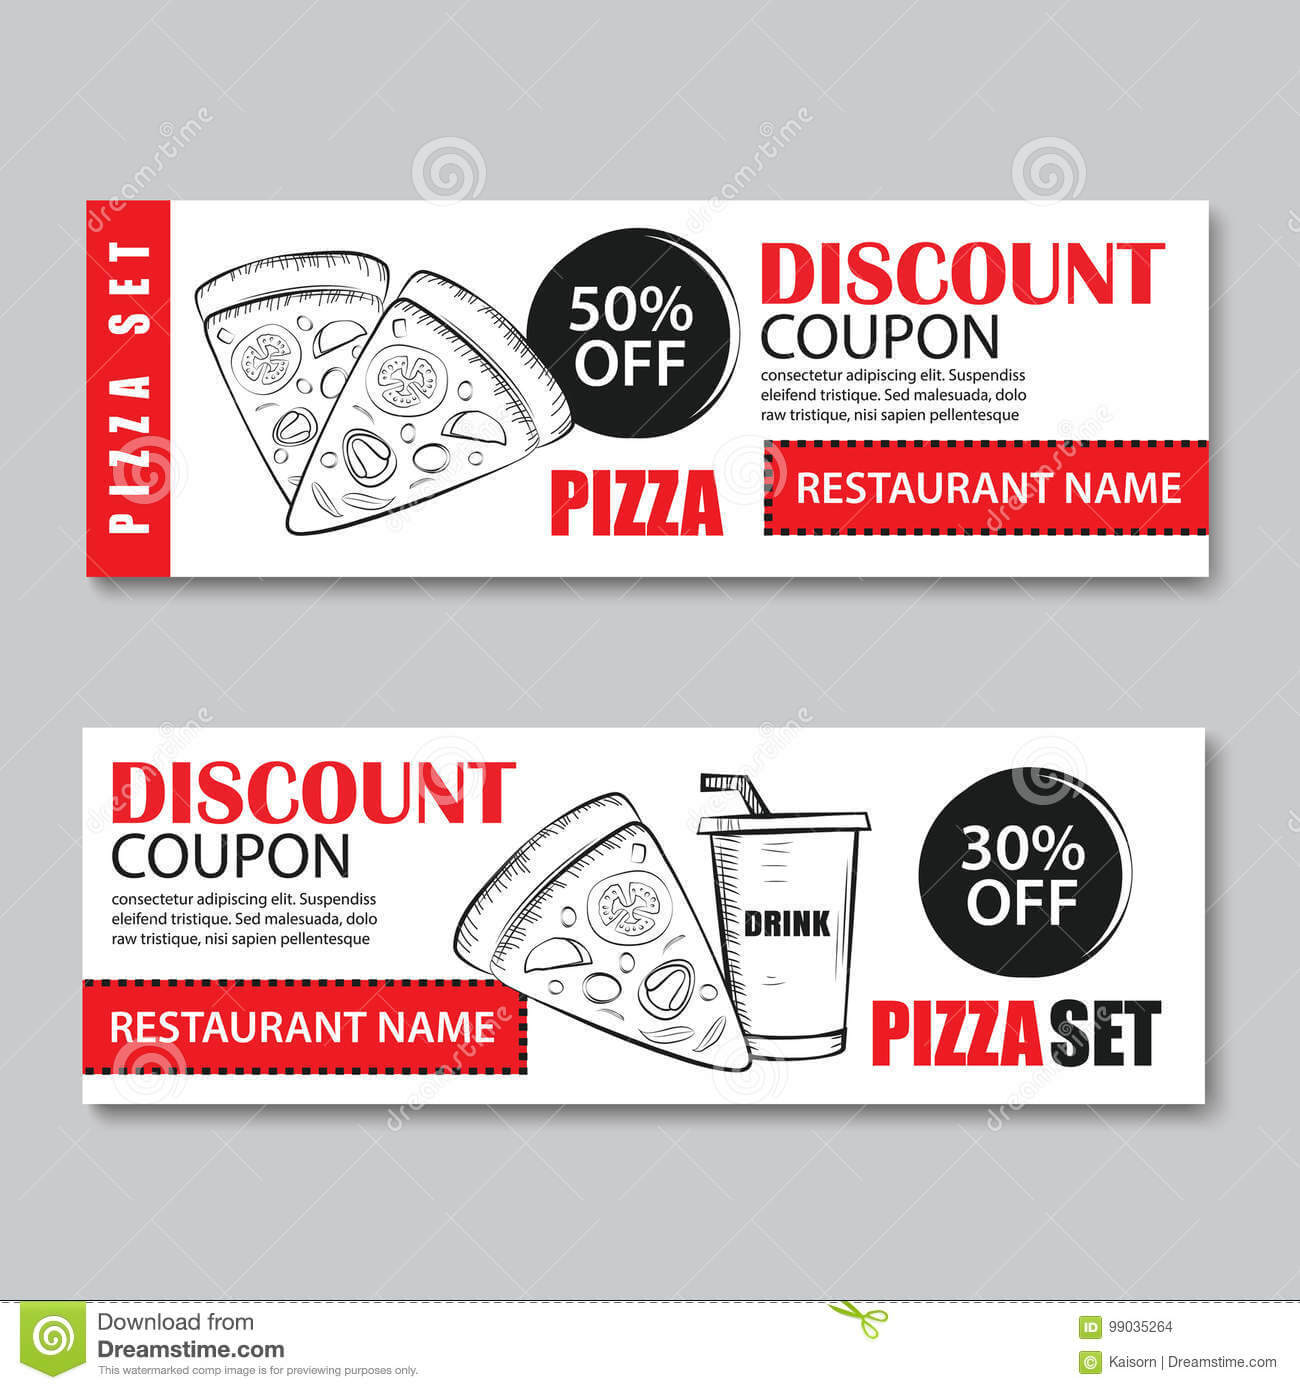 Fast Food Gift Voucher And Coupon Sale Discount Template Regarding Pizza Gift Certificate Template